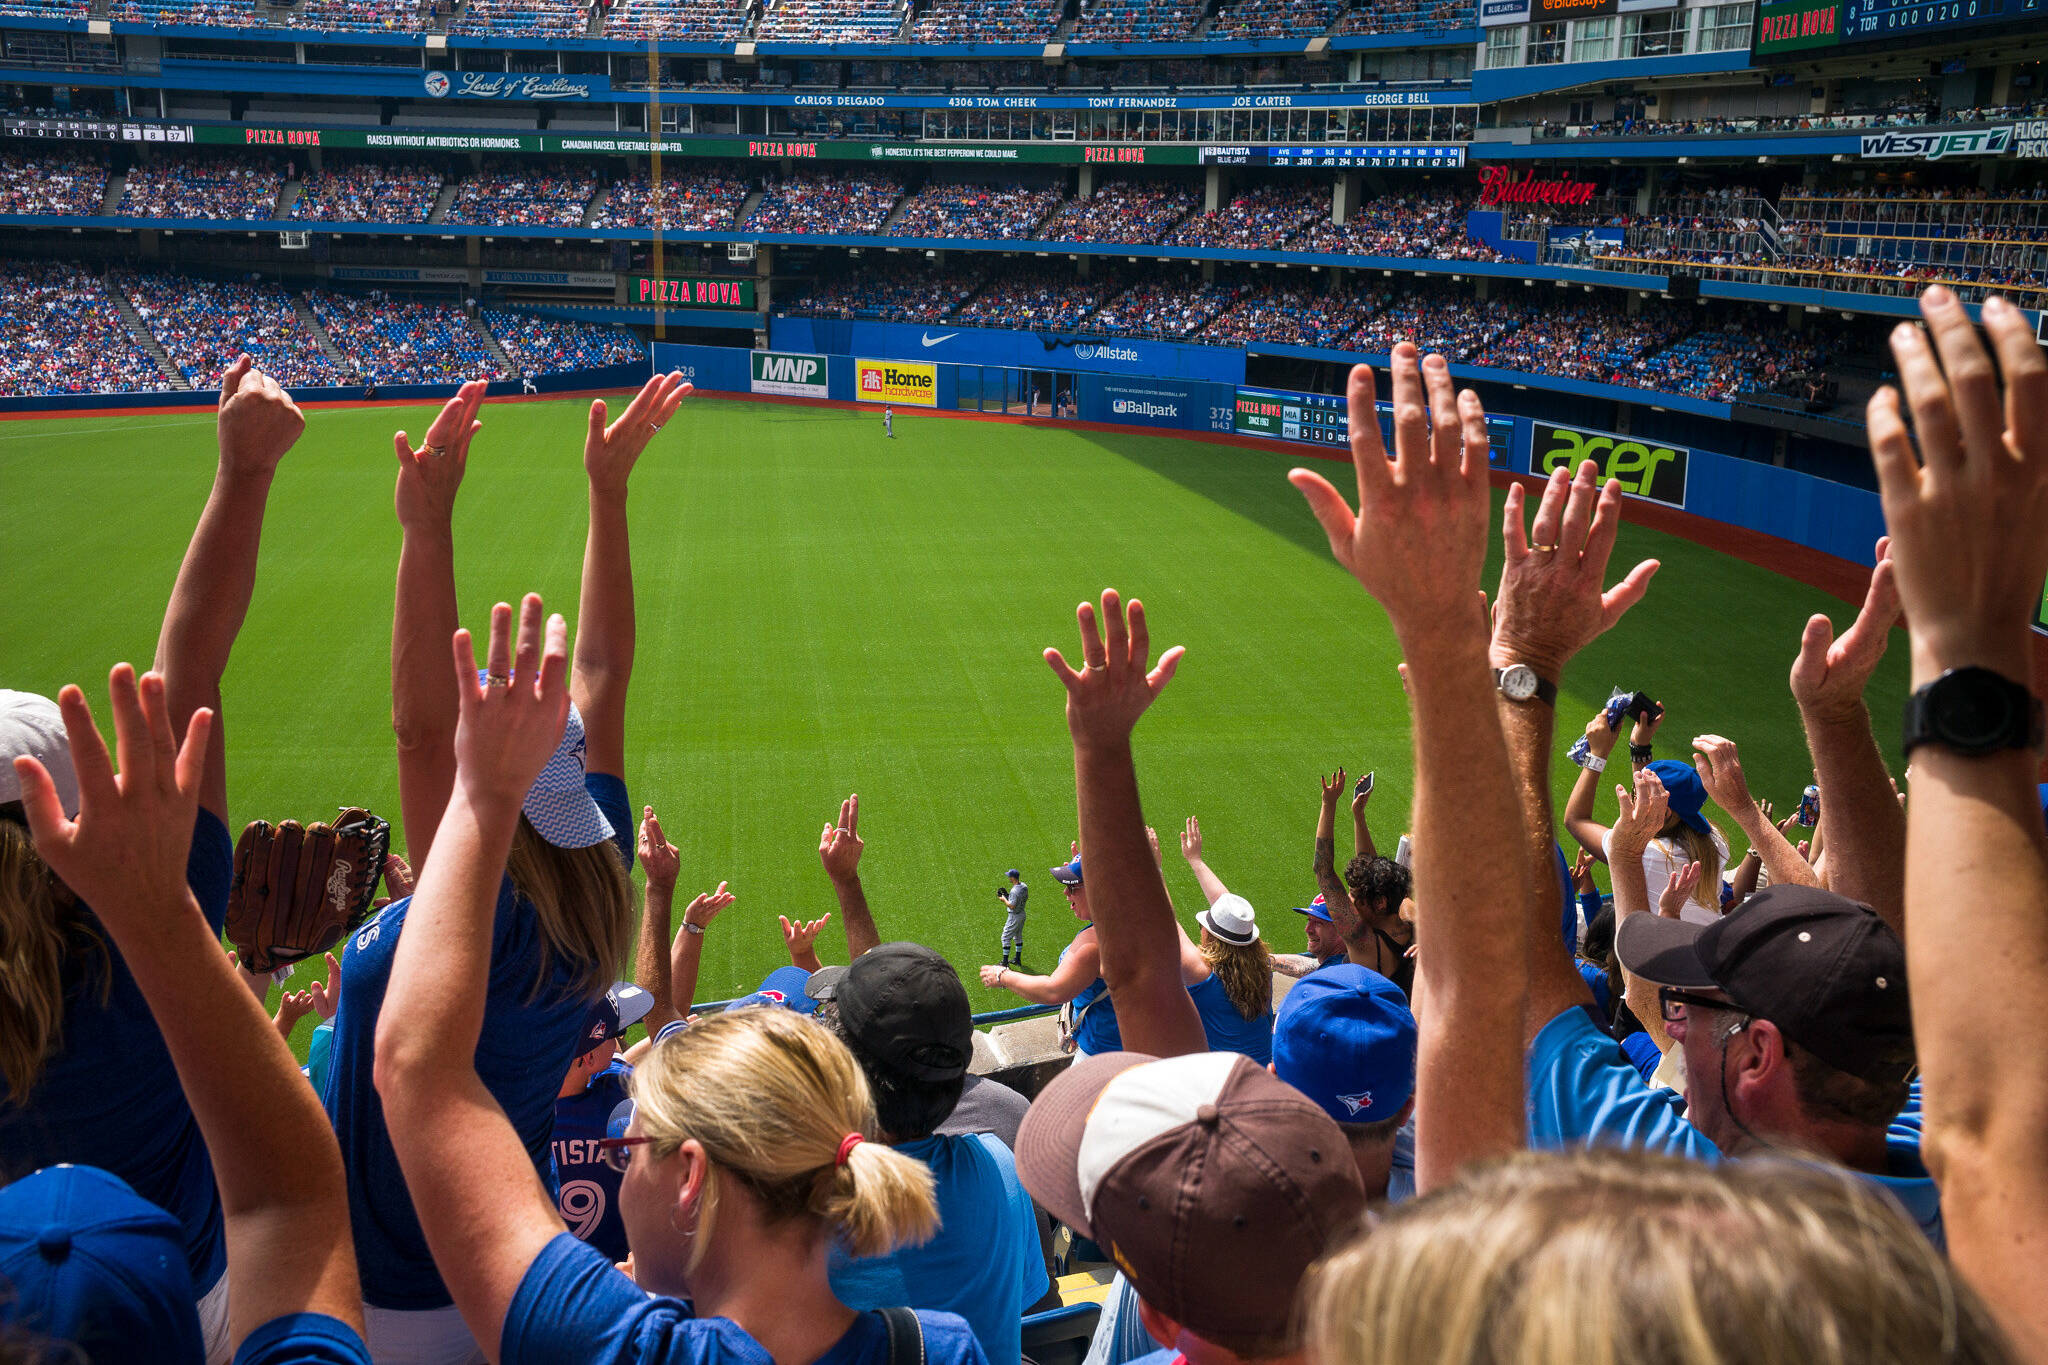 Toronto Blue Jays - We've got the perfect way to spend Saturday, May 2!  Join us at the ballpark for Blue Jays Hello Kitty Day, where a purchase of  a Specialty Ticket